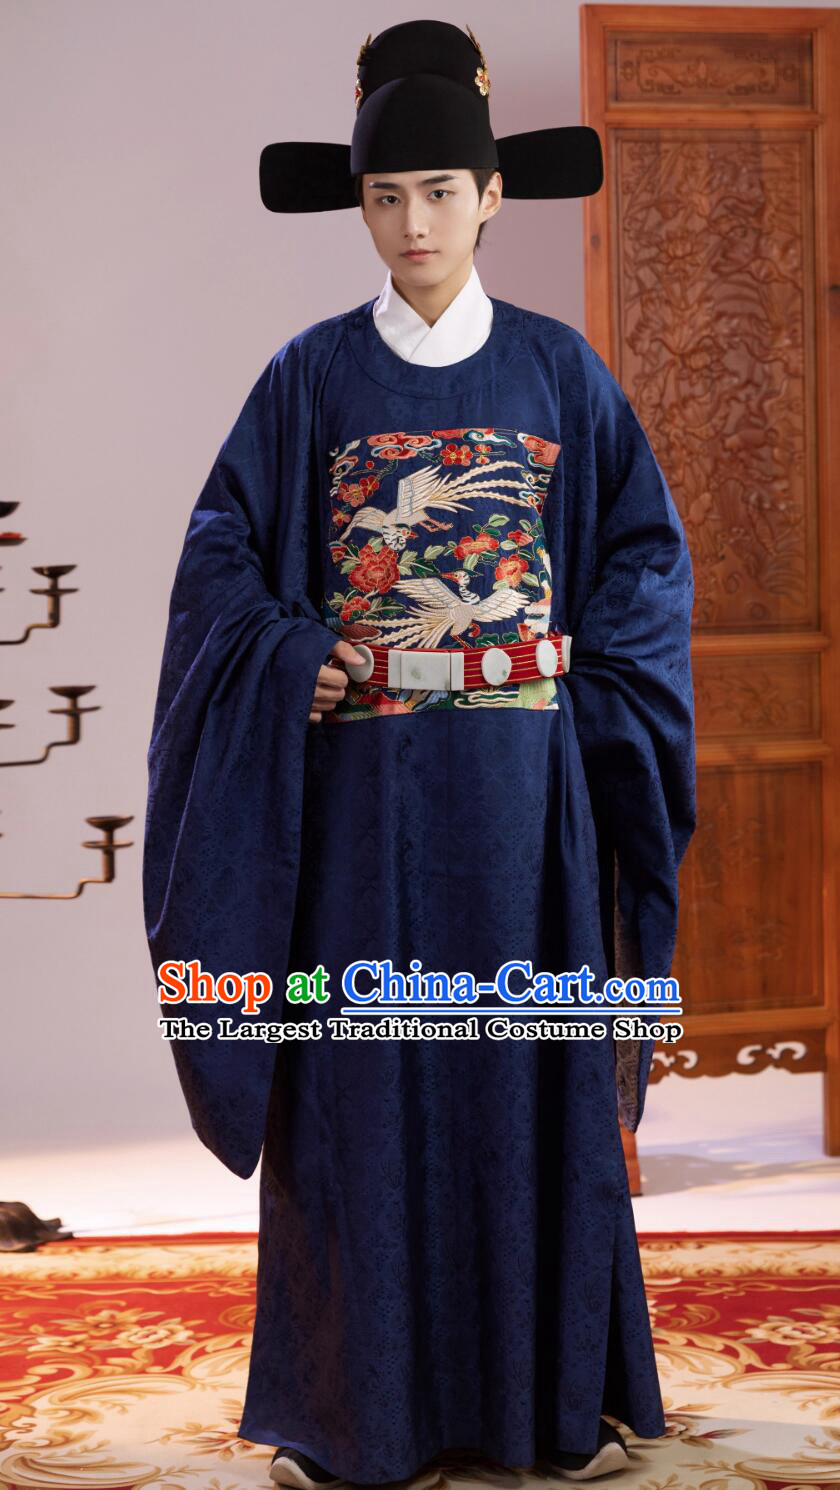 Navy Blue Chinese Embroidered Silver Pheasant Robe Ming Dynasty Court Costume Ancient China Fifth Rank Civil Official Clothing